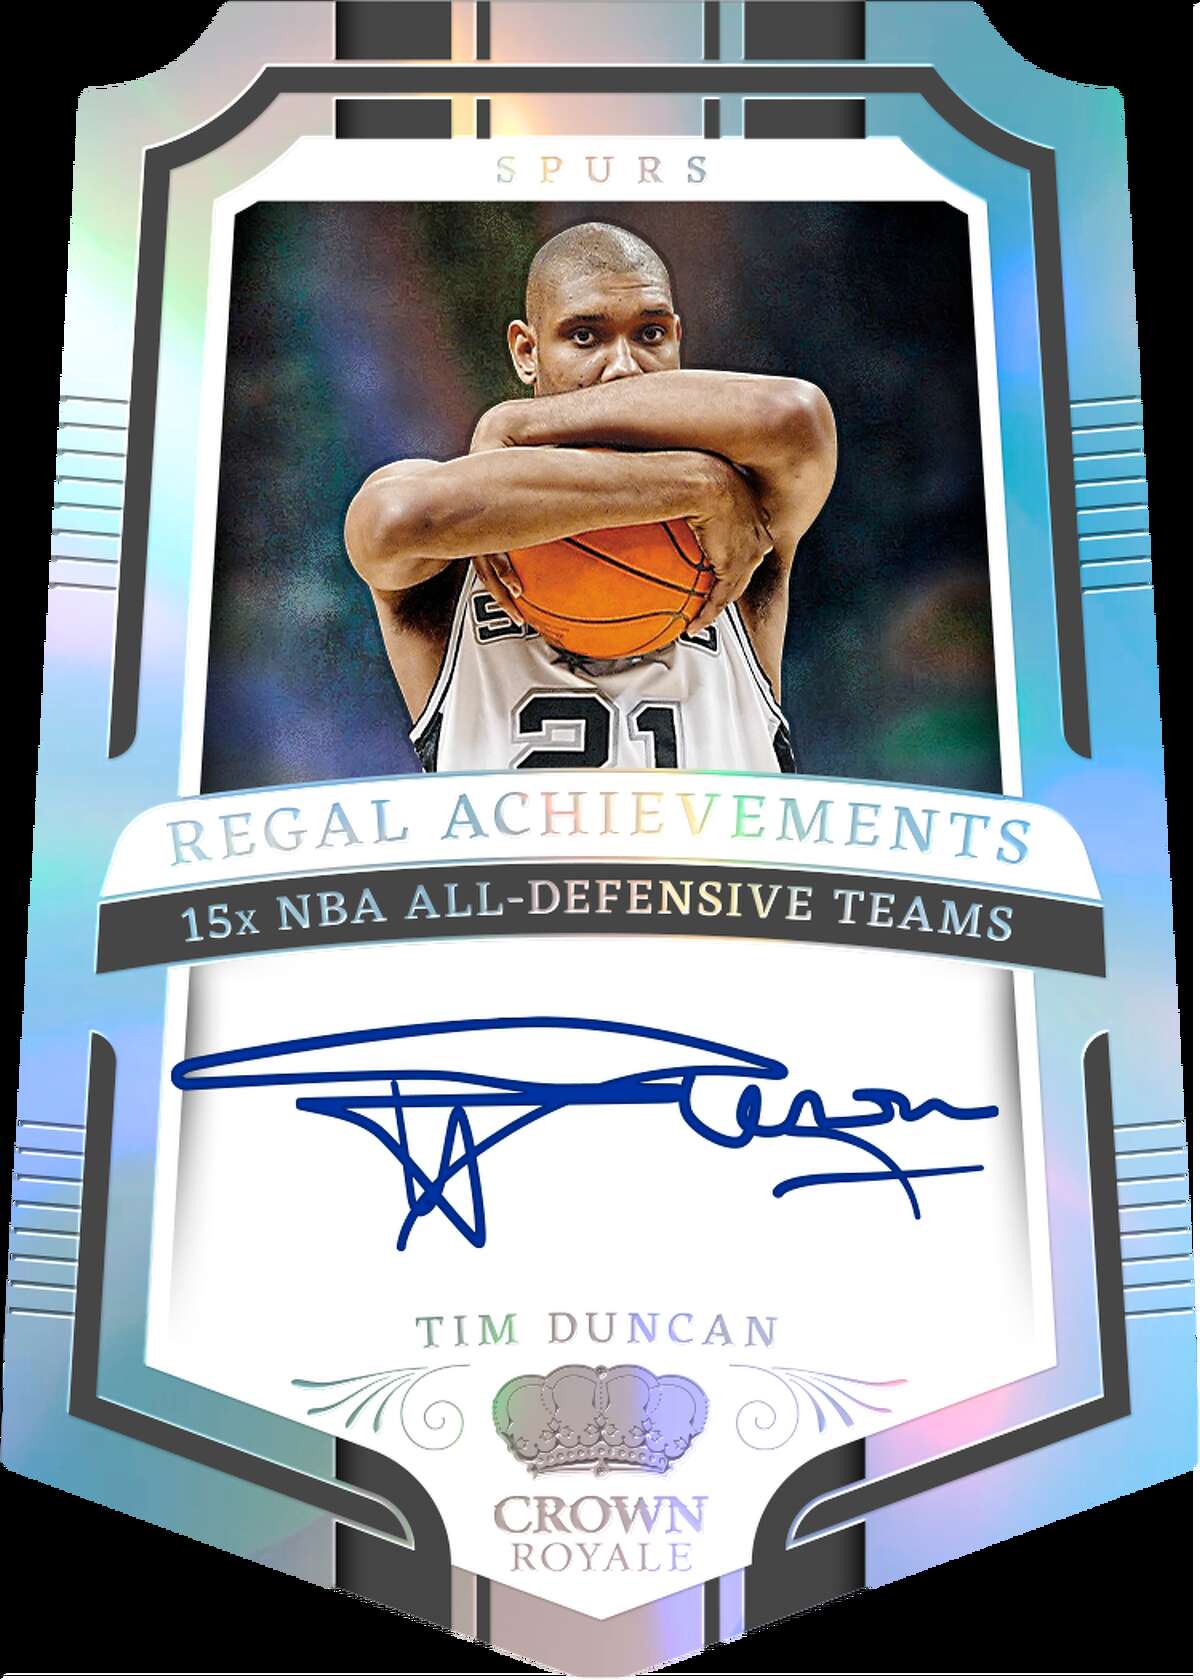 Word is that Tim Duncan signed with Panini so let us toast to the occasion!  : r/basketballcards